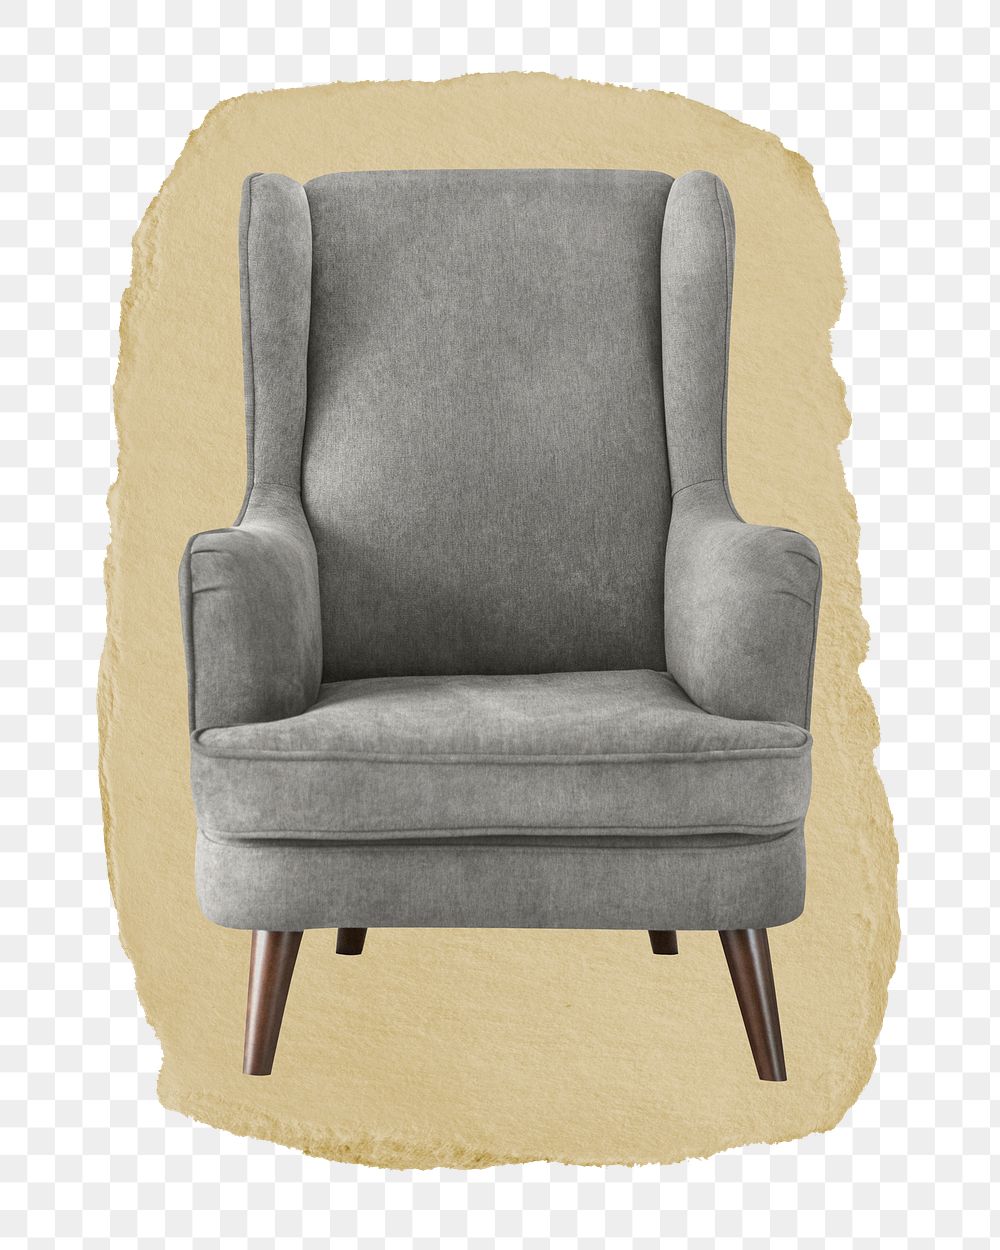 Retro armchair png ripped paper sticker, furniture graphic, transparent background